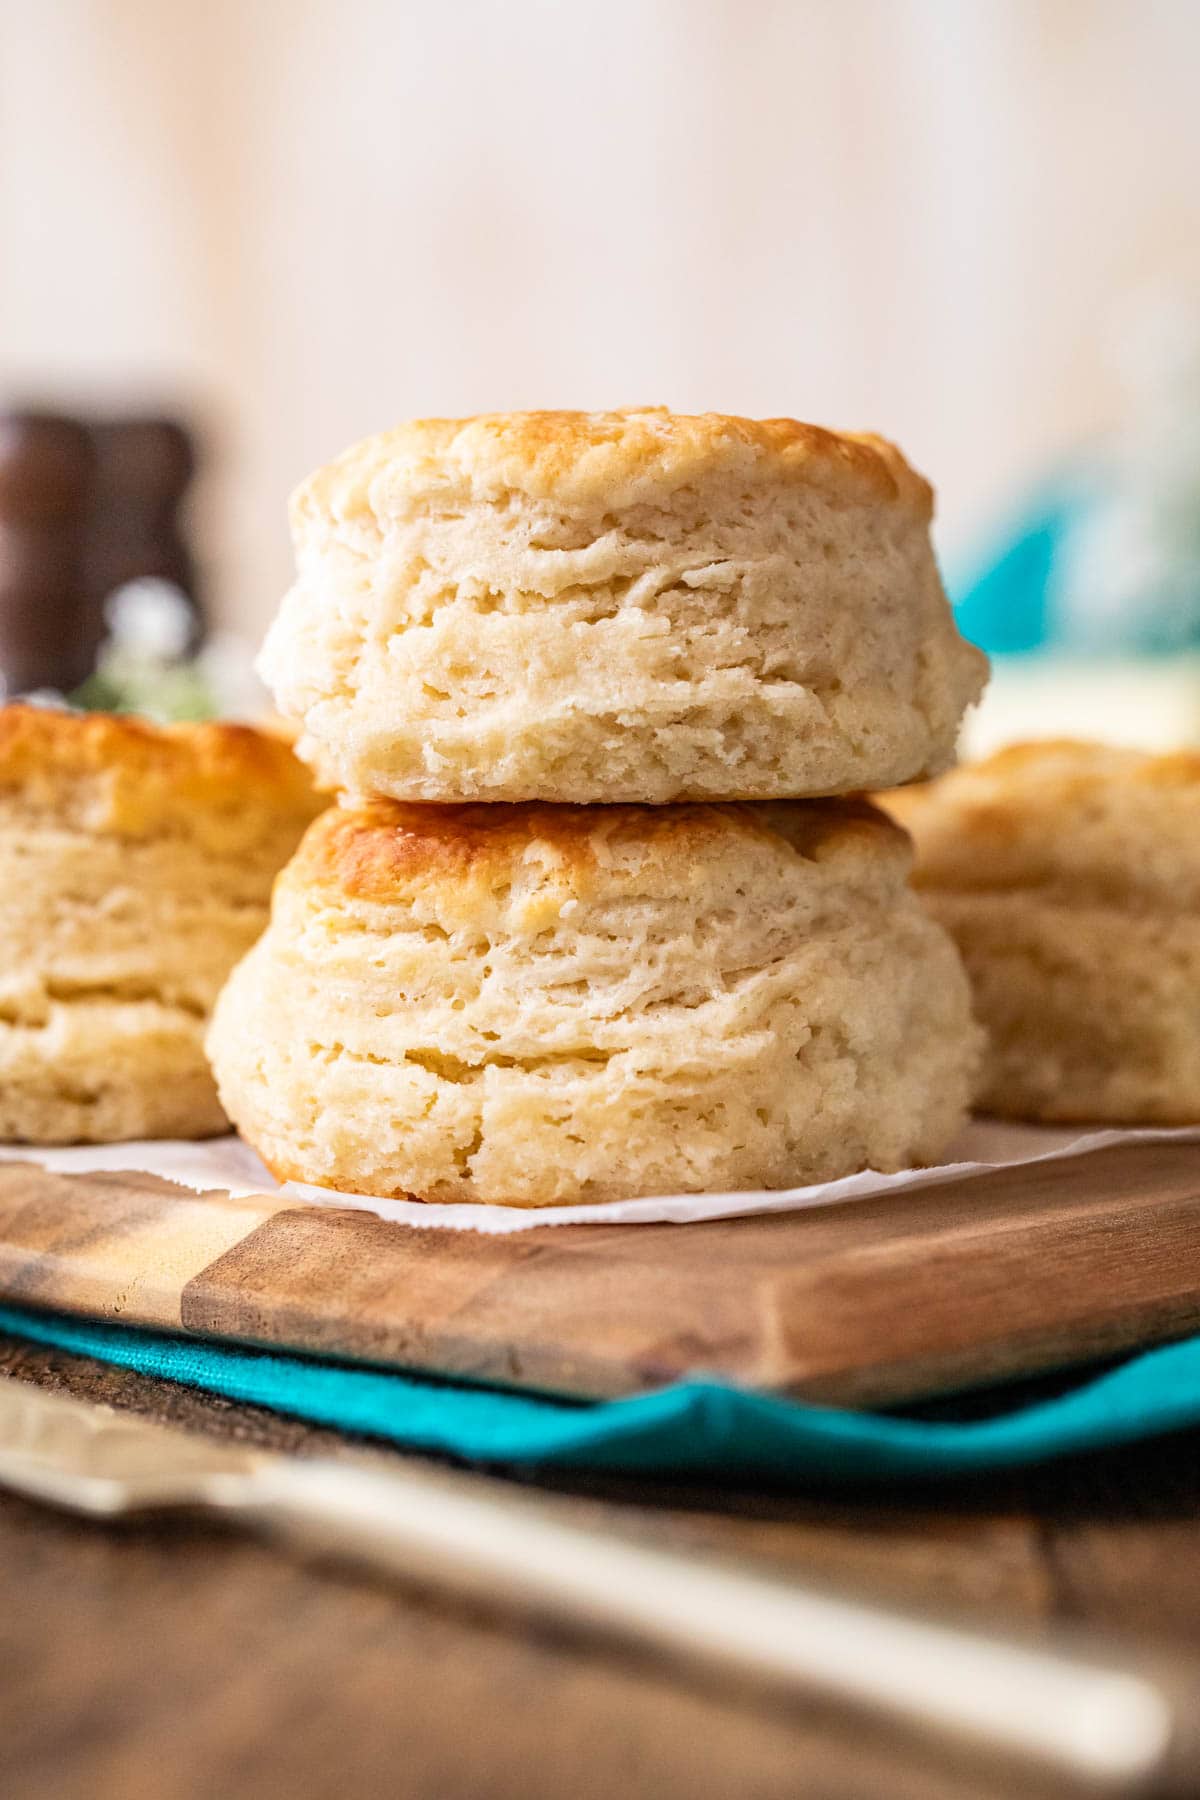 Two fluffy, layered biscuits stacked on top of each other.